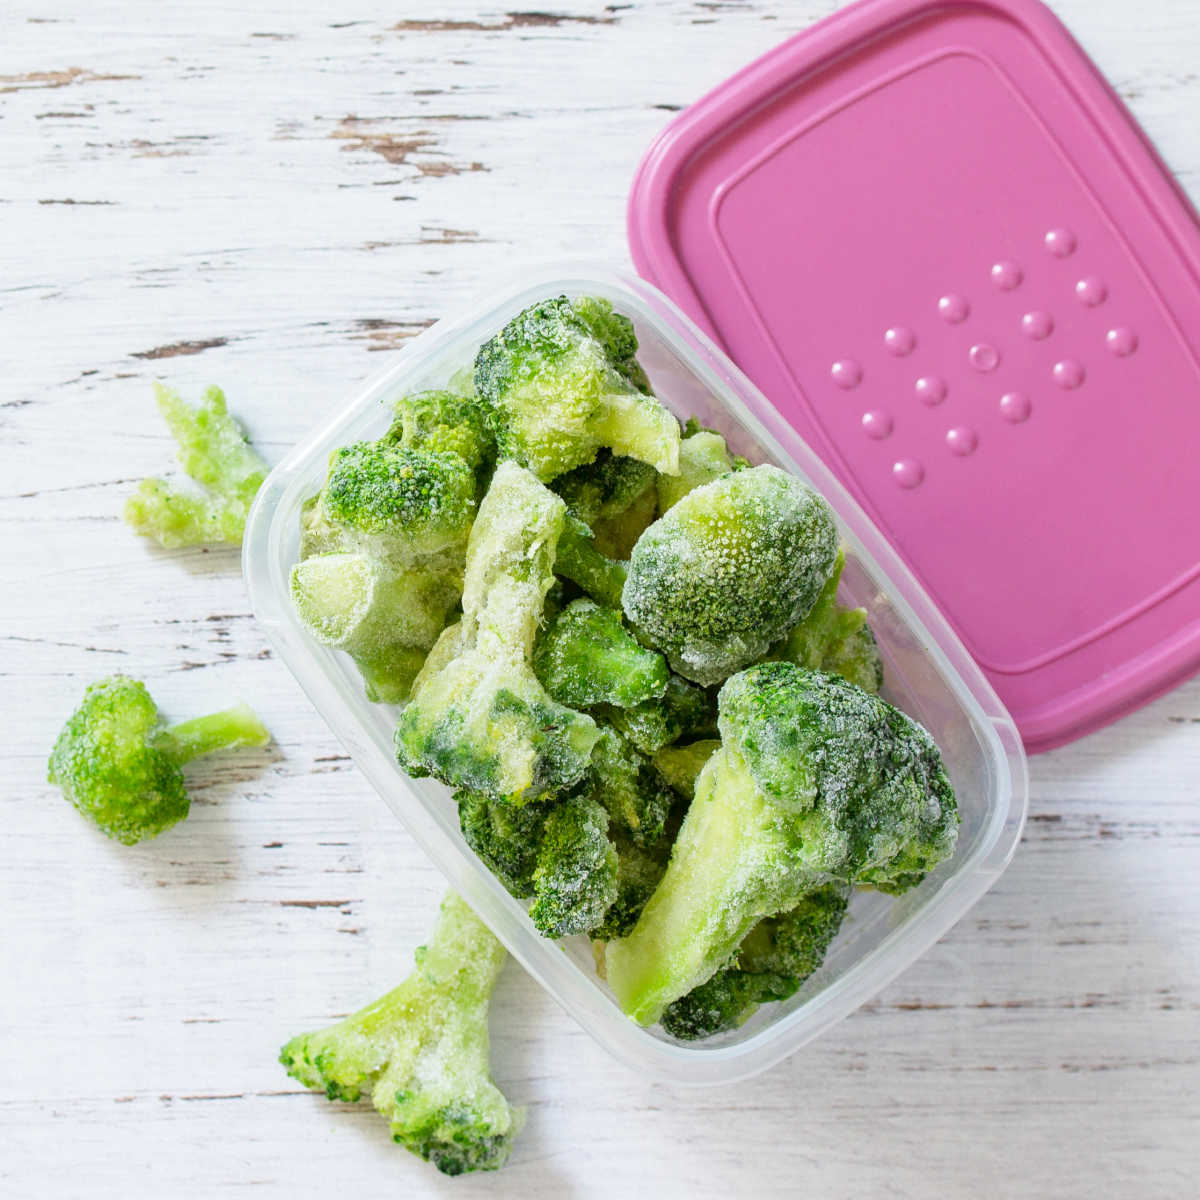 Plastic container overflowing with frozen broccoli.